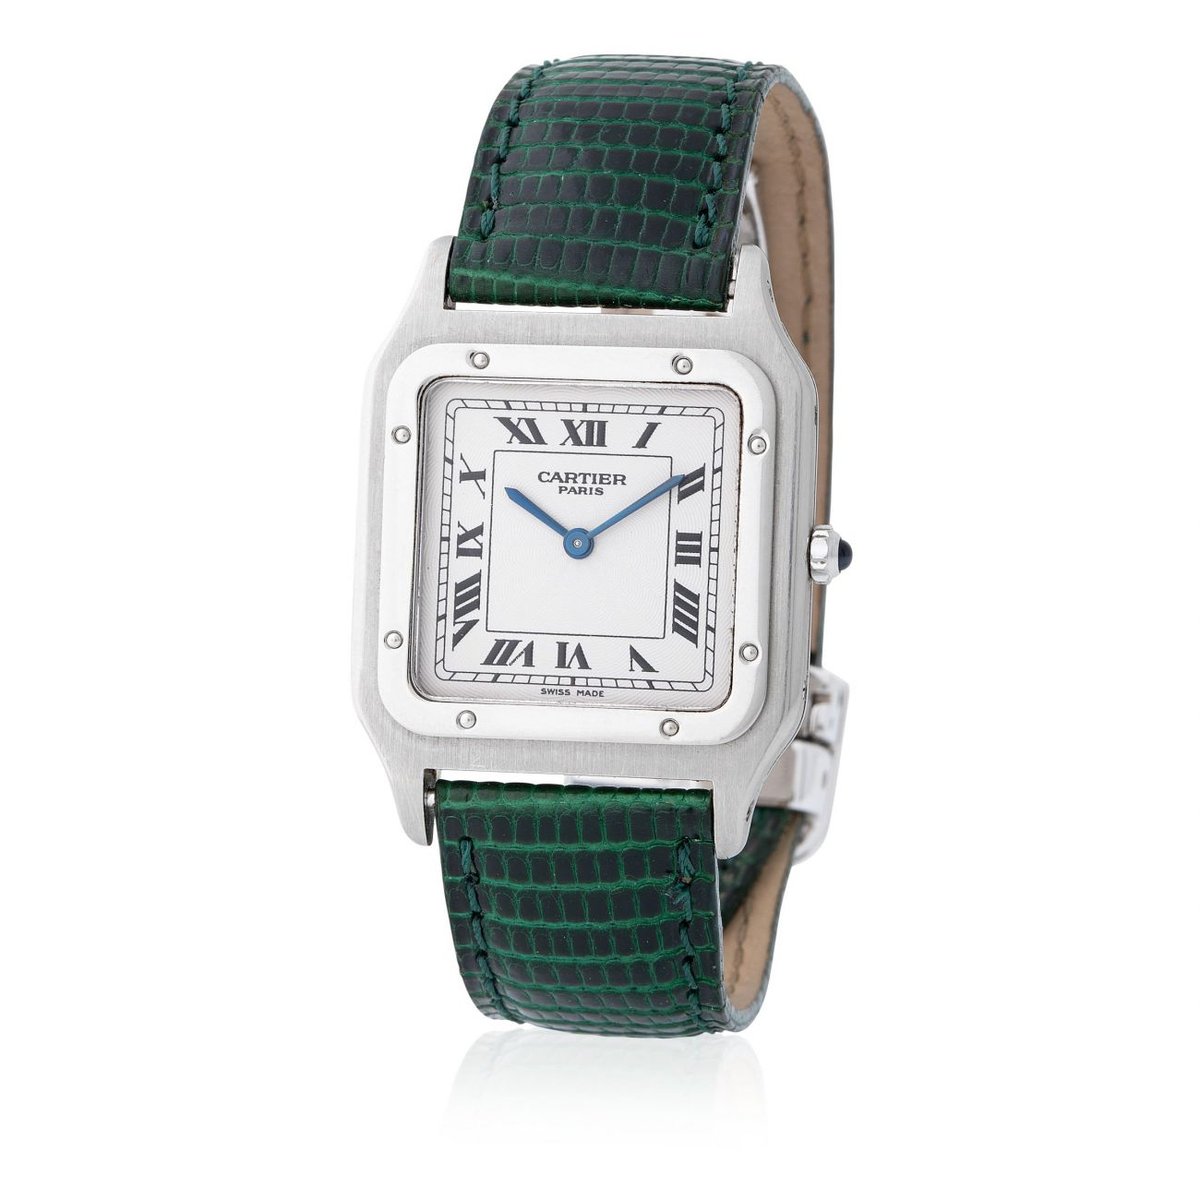 1968 1960's Cartier Tank Louis Watch For Sale - Unisex Vintage Time only